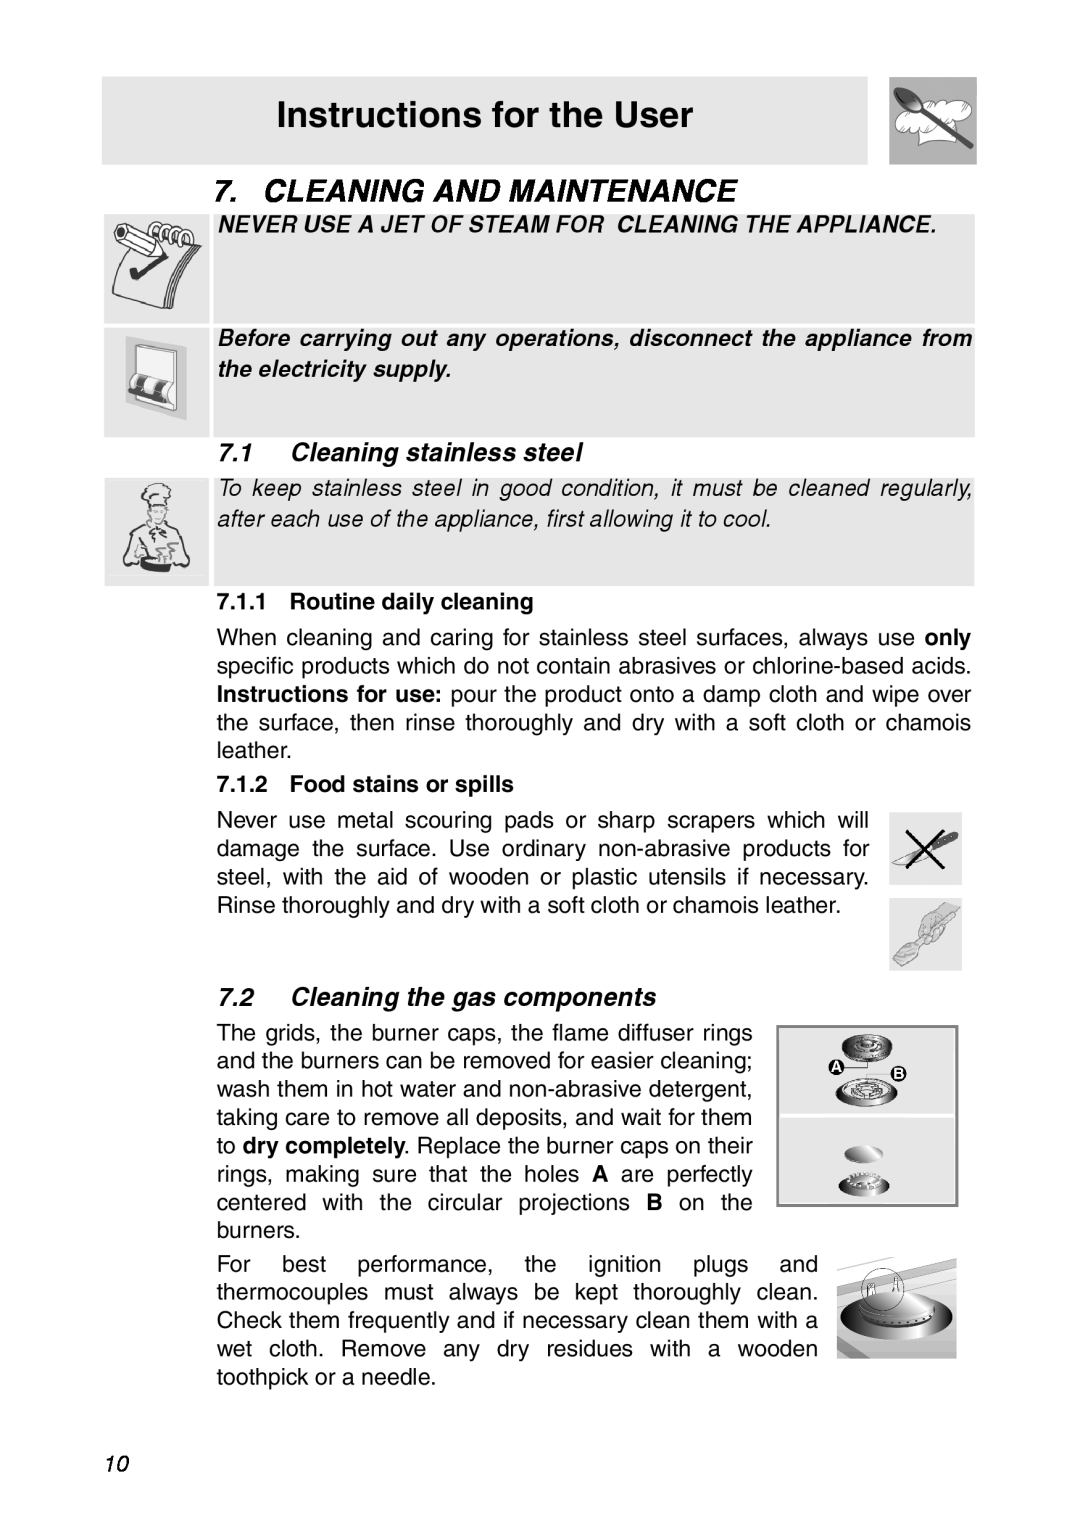 Smeg CIR900X Cleaning And Maintenance, Instructions for the User, 7.1Cleaning stainless steel, Routine daily cleaning 